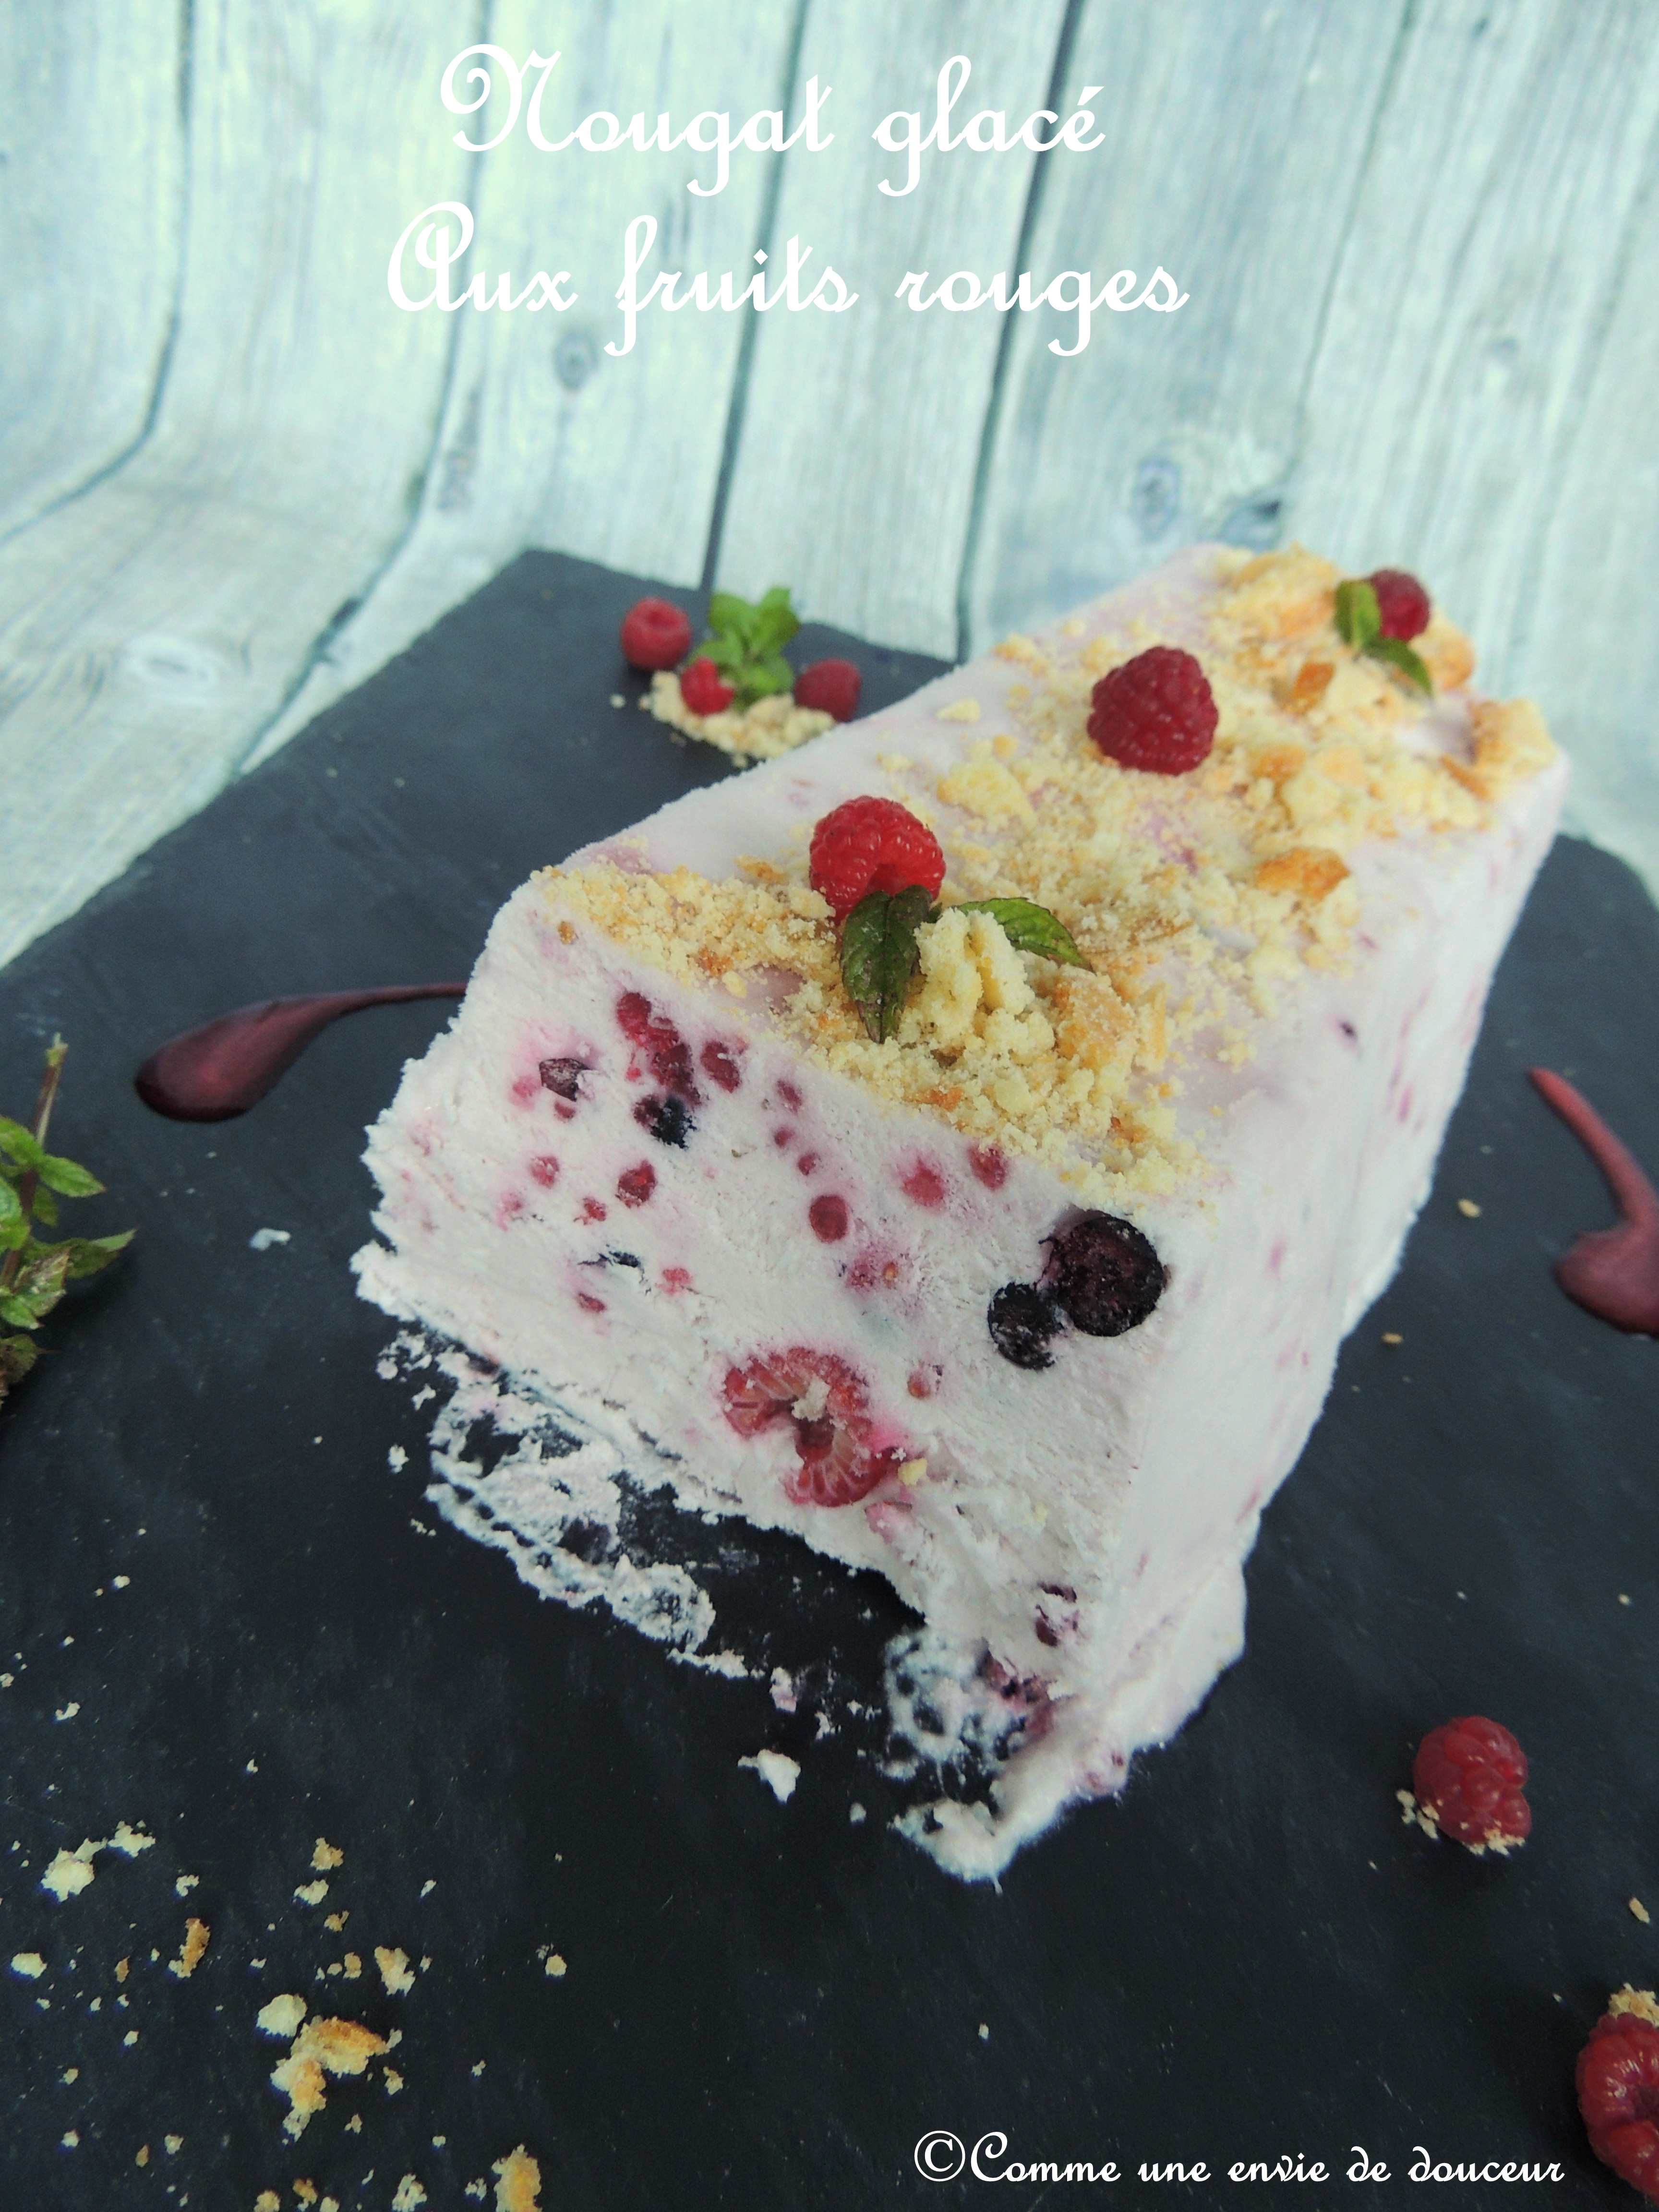 Nougat glacé aux fruits rouges – Iced nougat & red berries